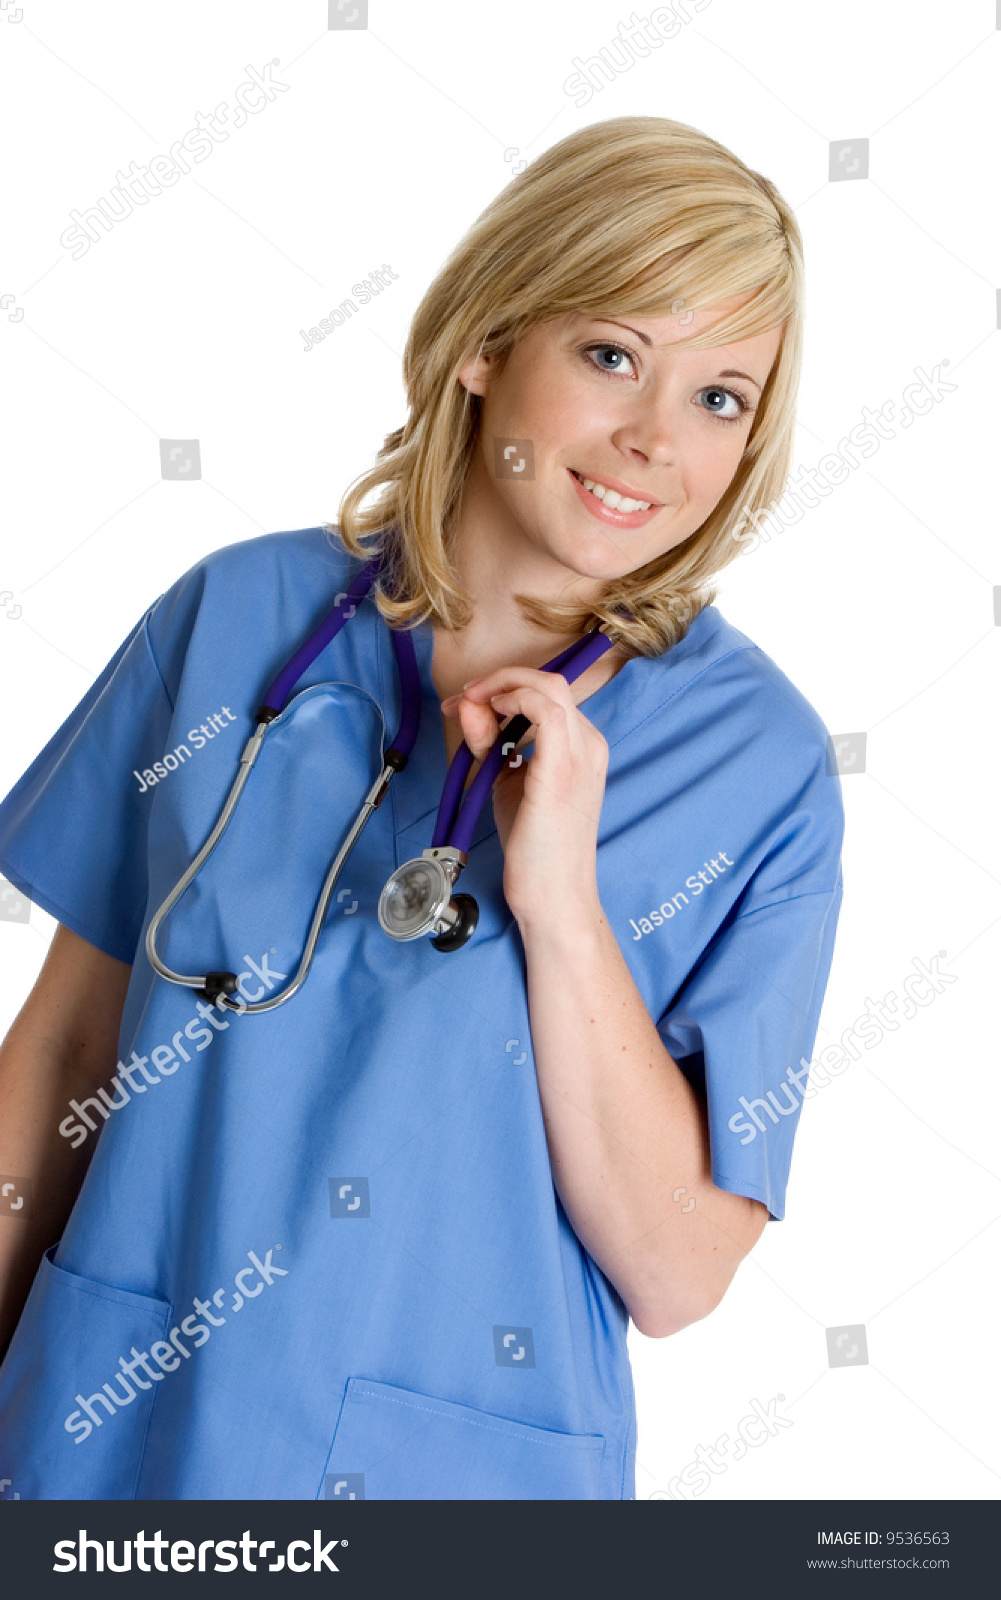 Beautiful nurse stands stock photo. Image of healthy 